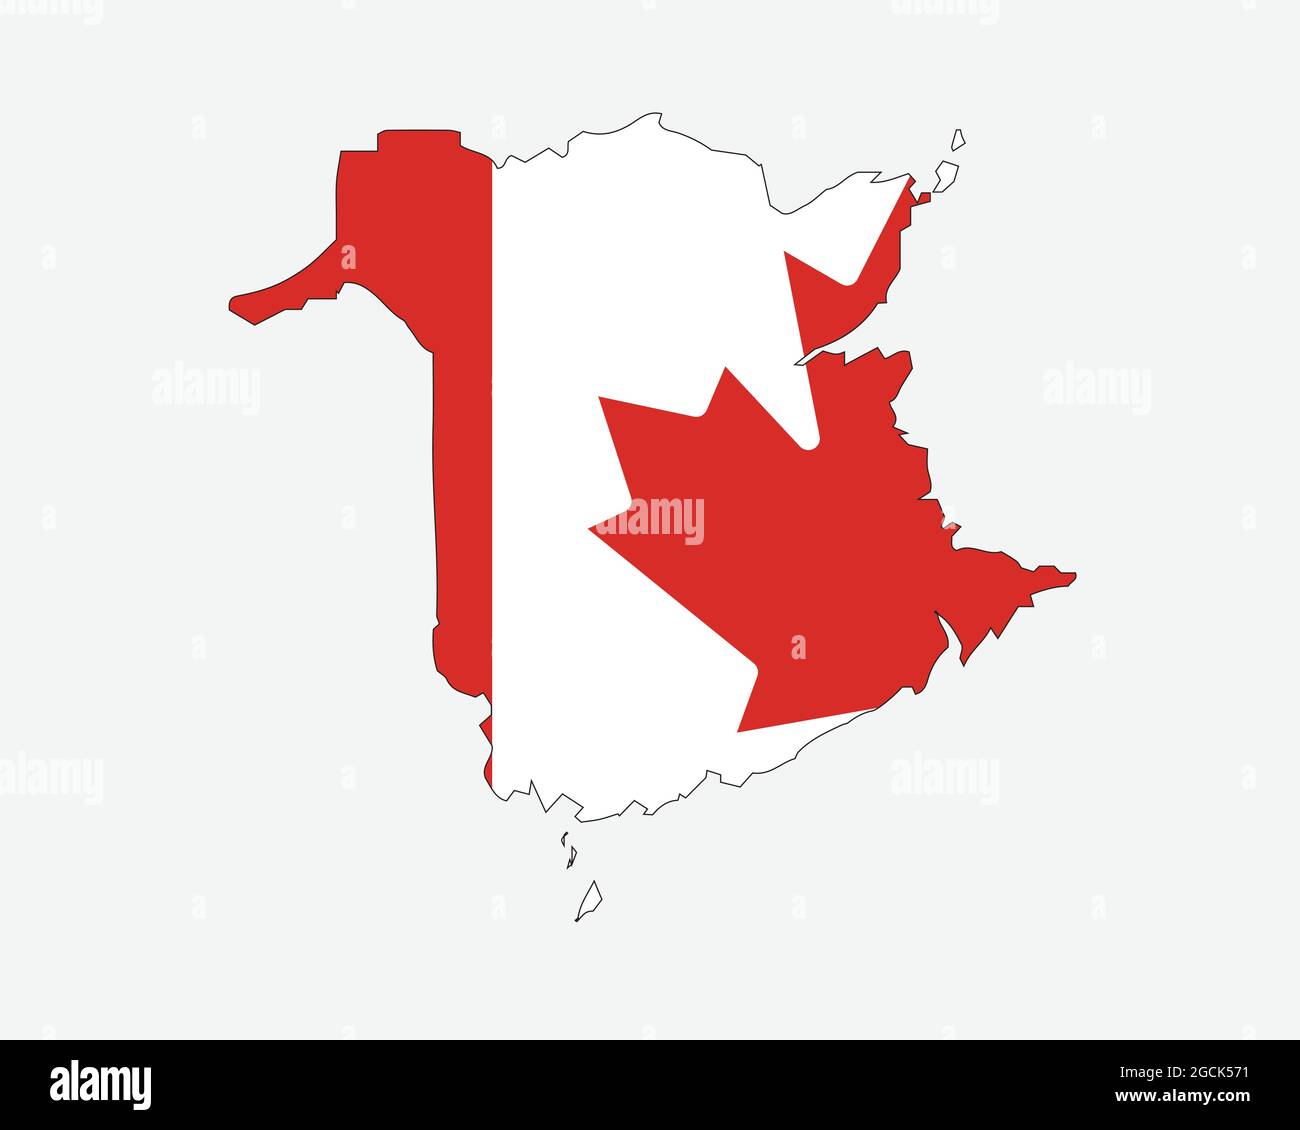 New Brunswick Map on Canadian Flag. NB, CA Province Map on Canada Flag. EPS Vector Graphic Clipart Icon Stock Vector